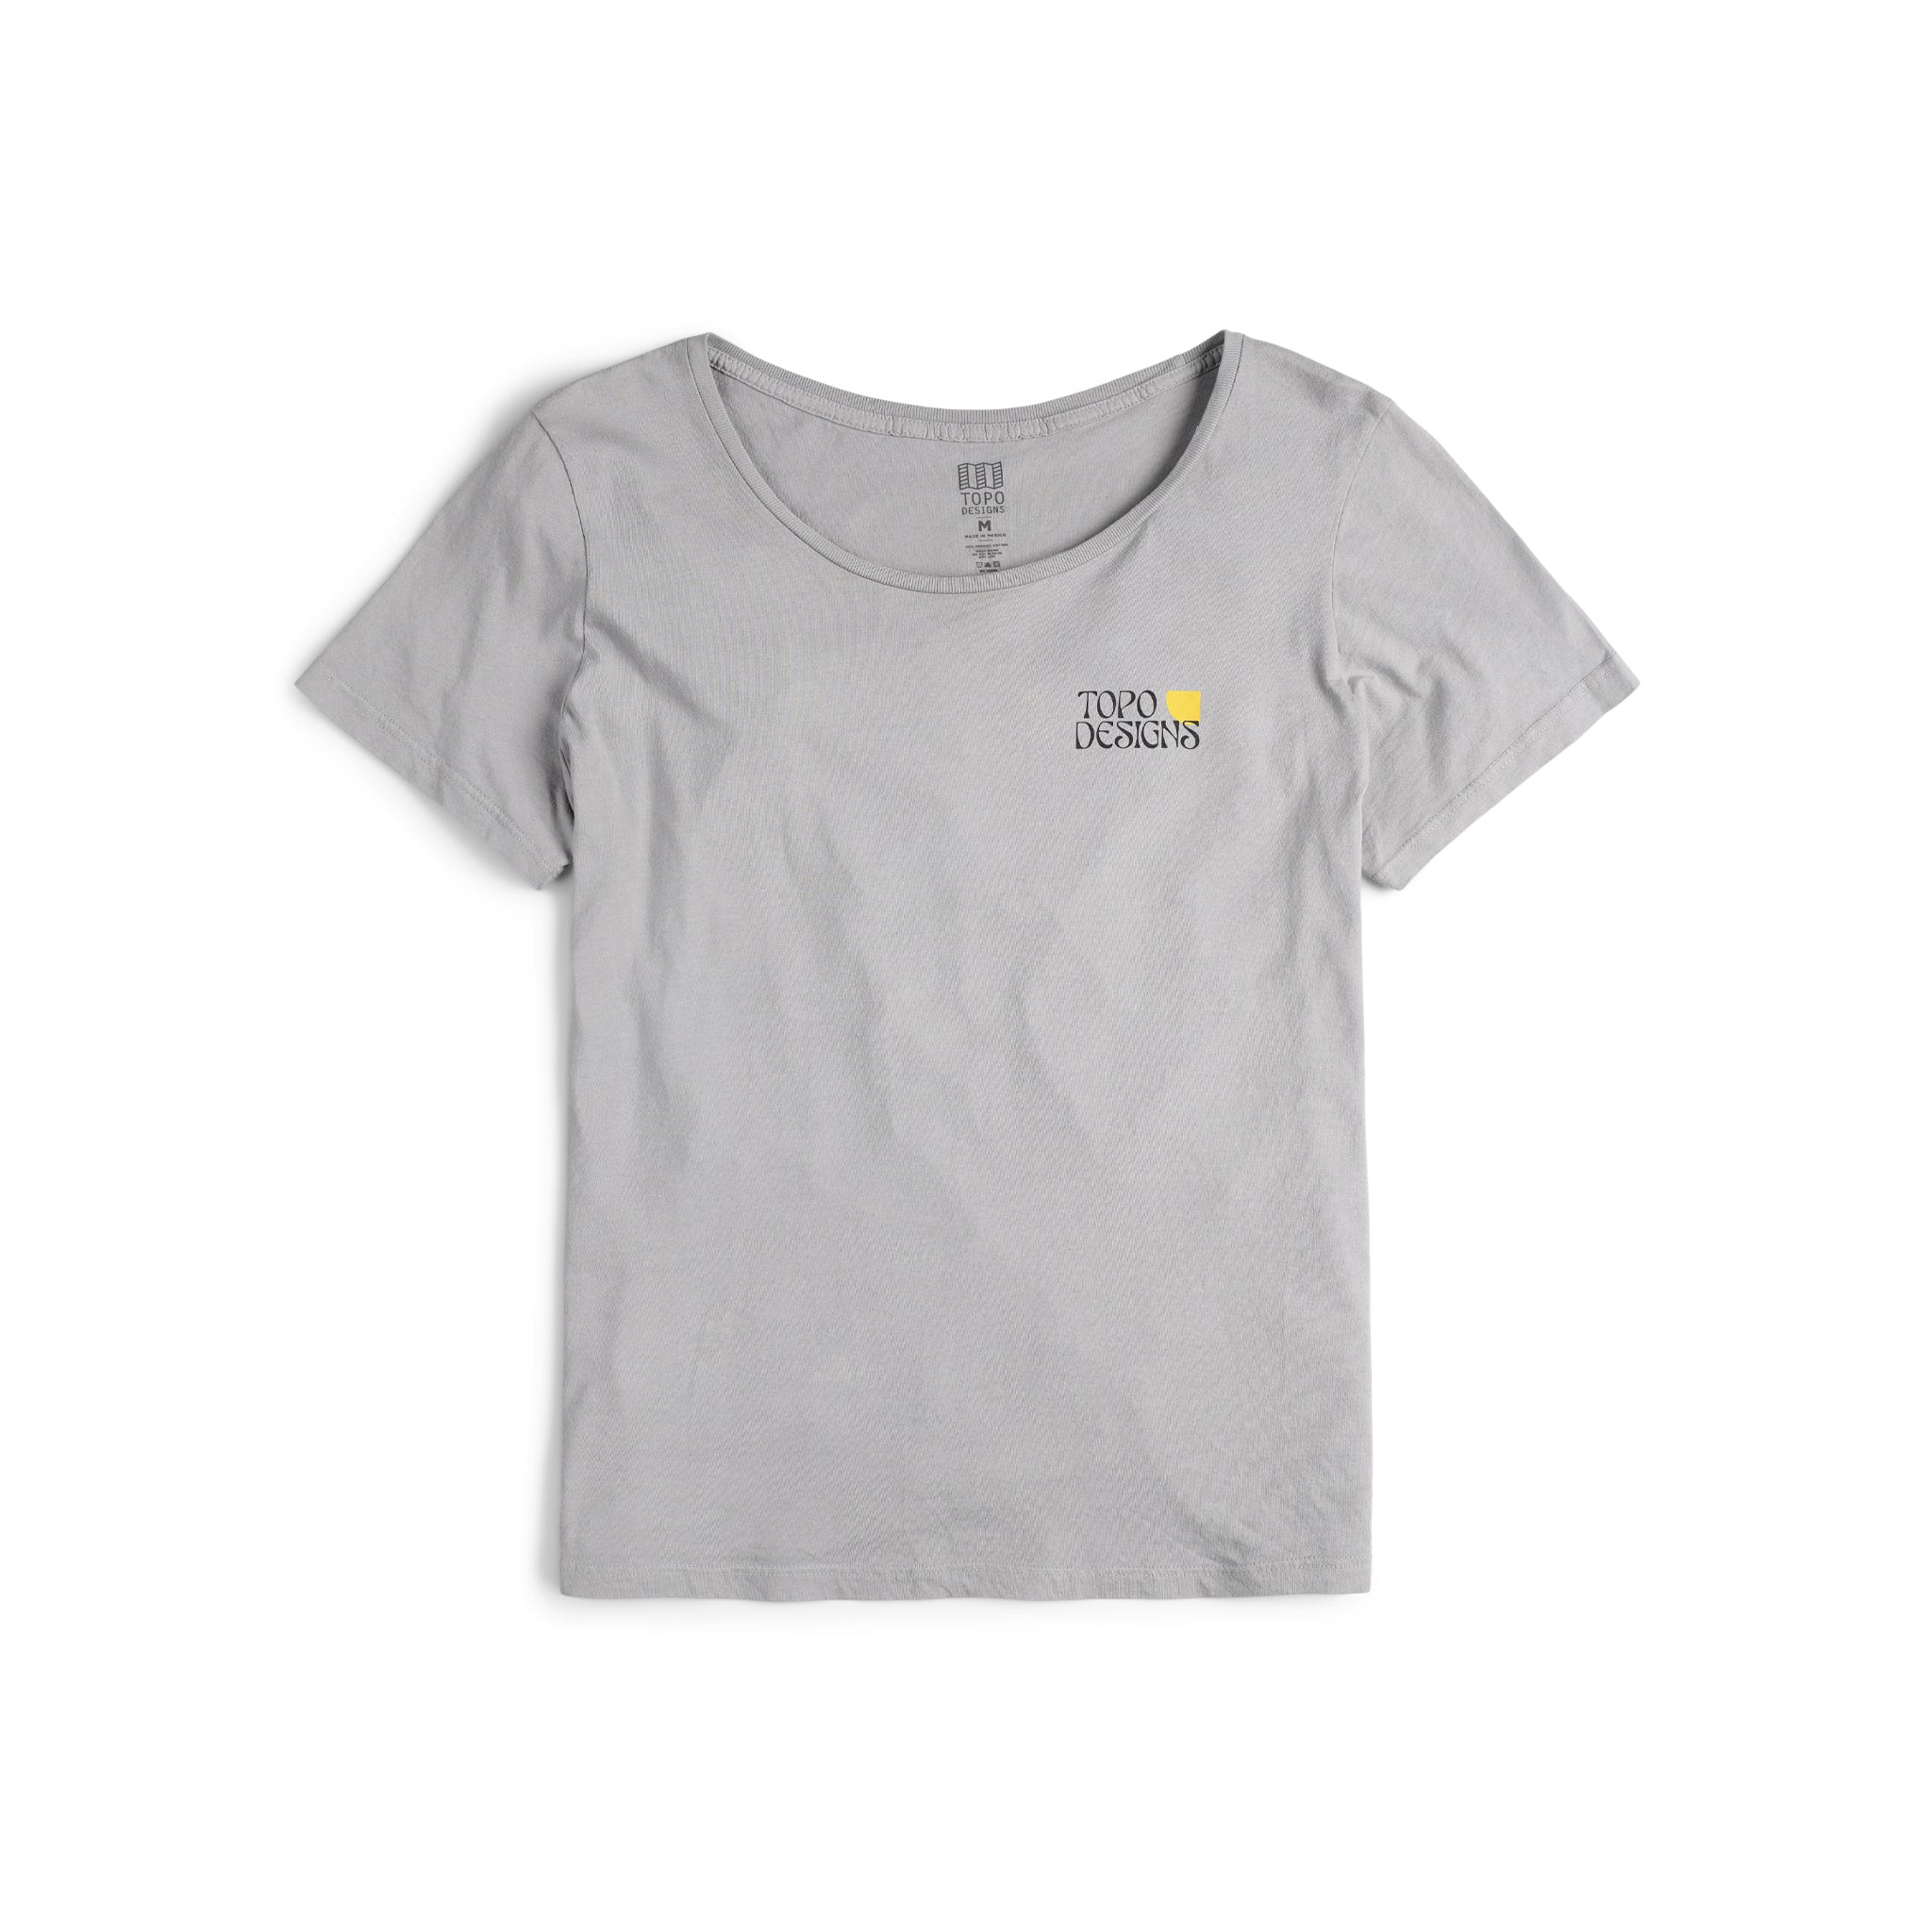 Front view of Topo Designs Women's Canyons Tee 100% organic cotton short sleeve graphic logo t-shirt in "gray".